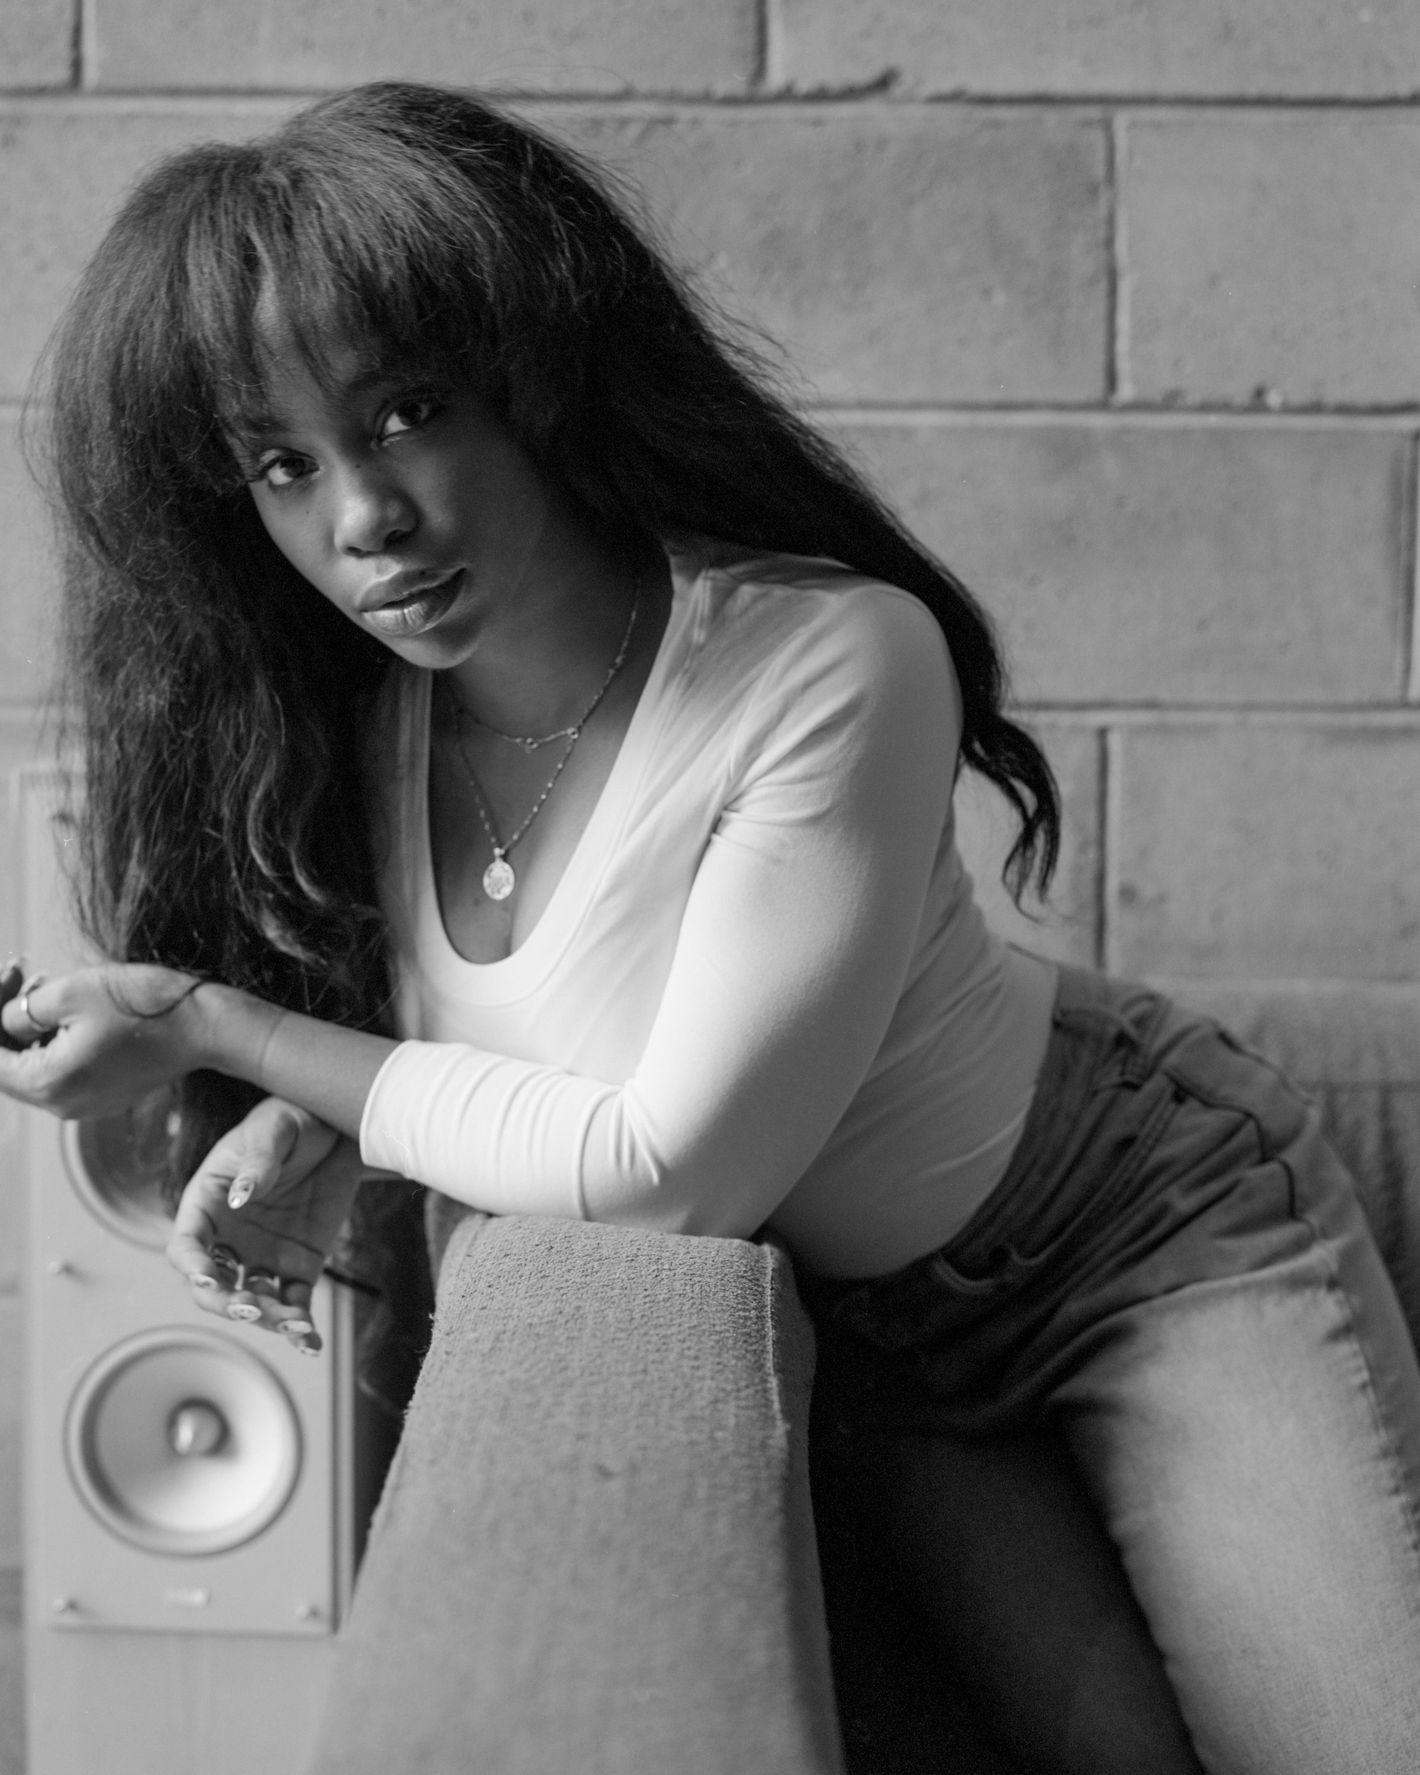 Meet SZA, the R&B Sensation With an Out-of-This-World Sound